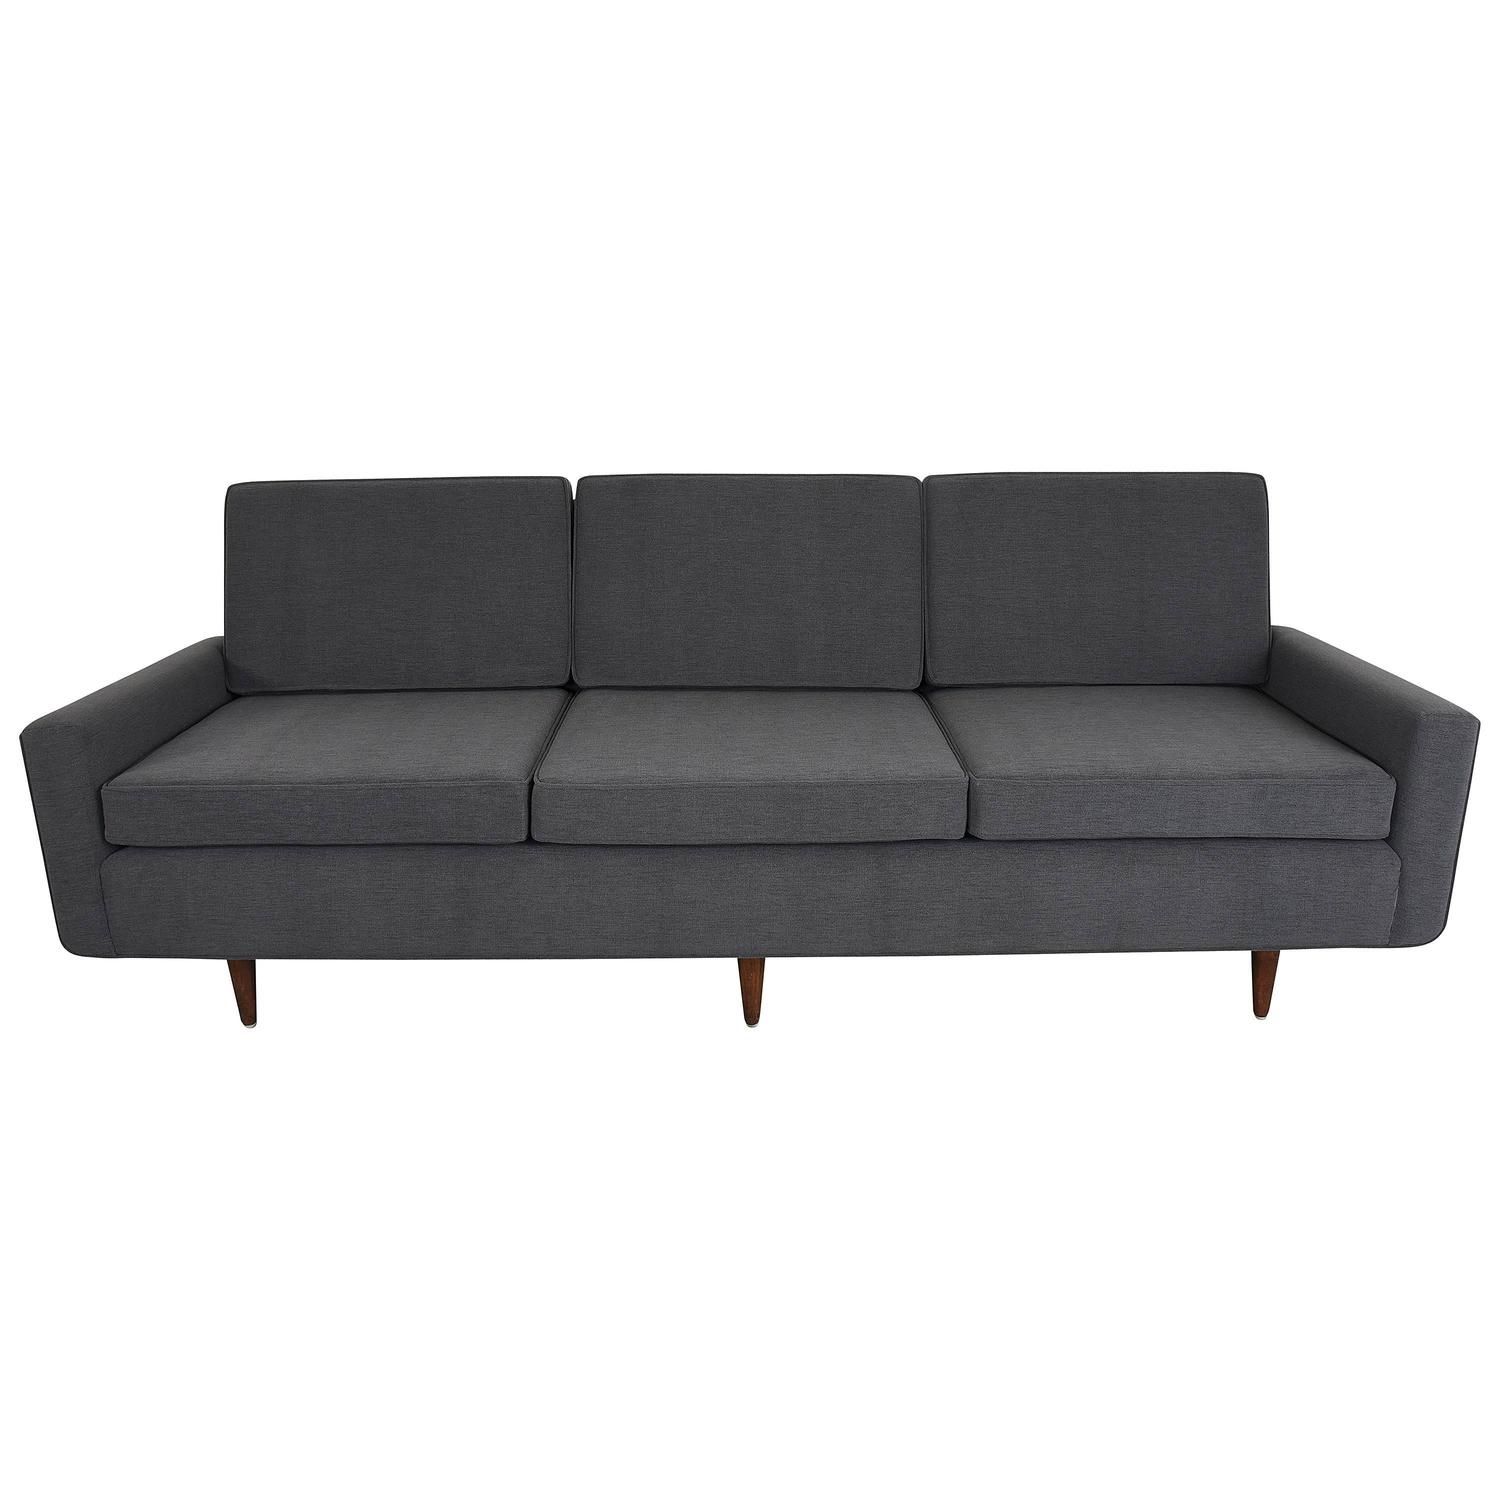 Florence Knoll Sofa Three Seat Sofa Model 26 Pair Available For Within Florence Sofas And Loveseats (View 13 of 15)